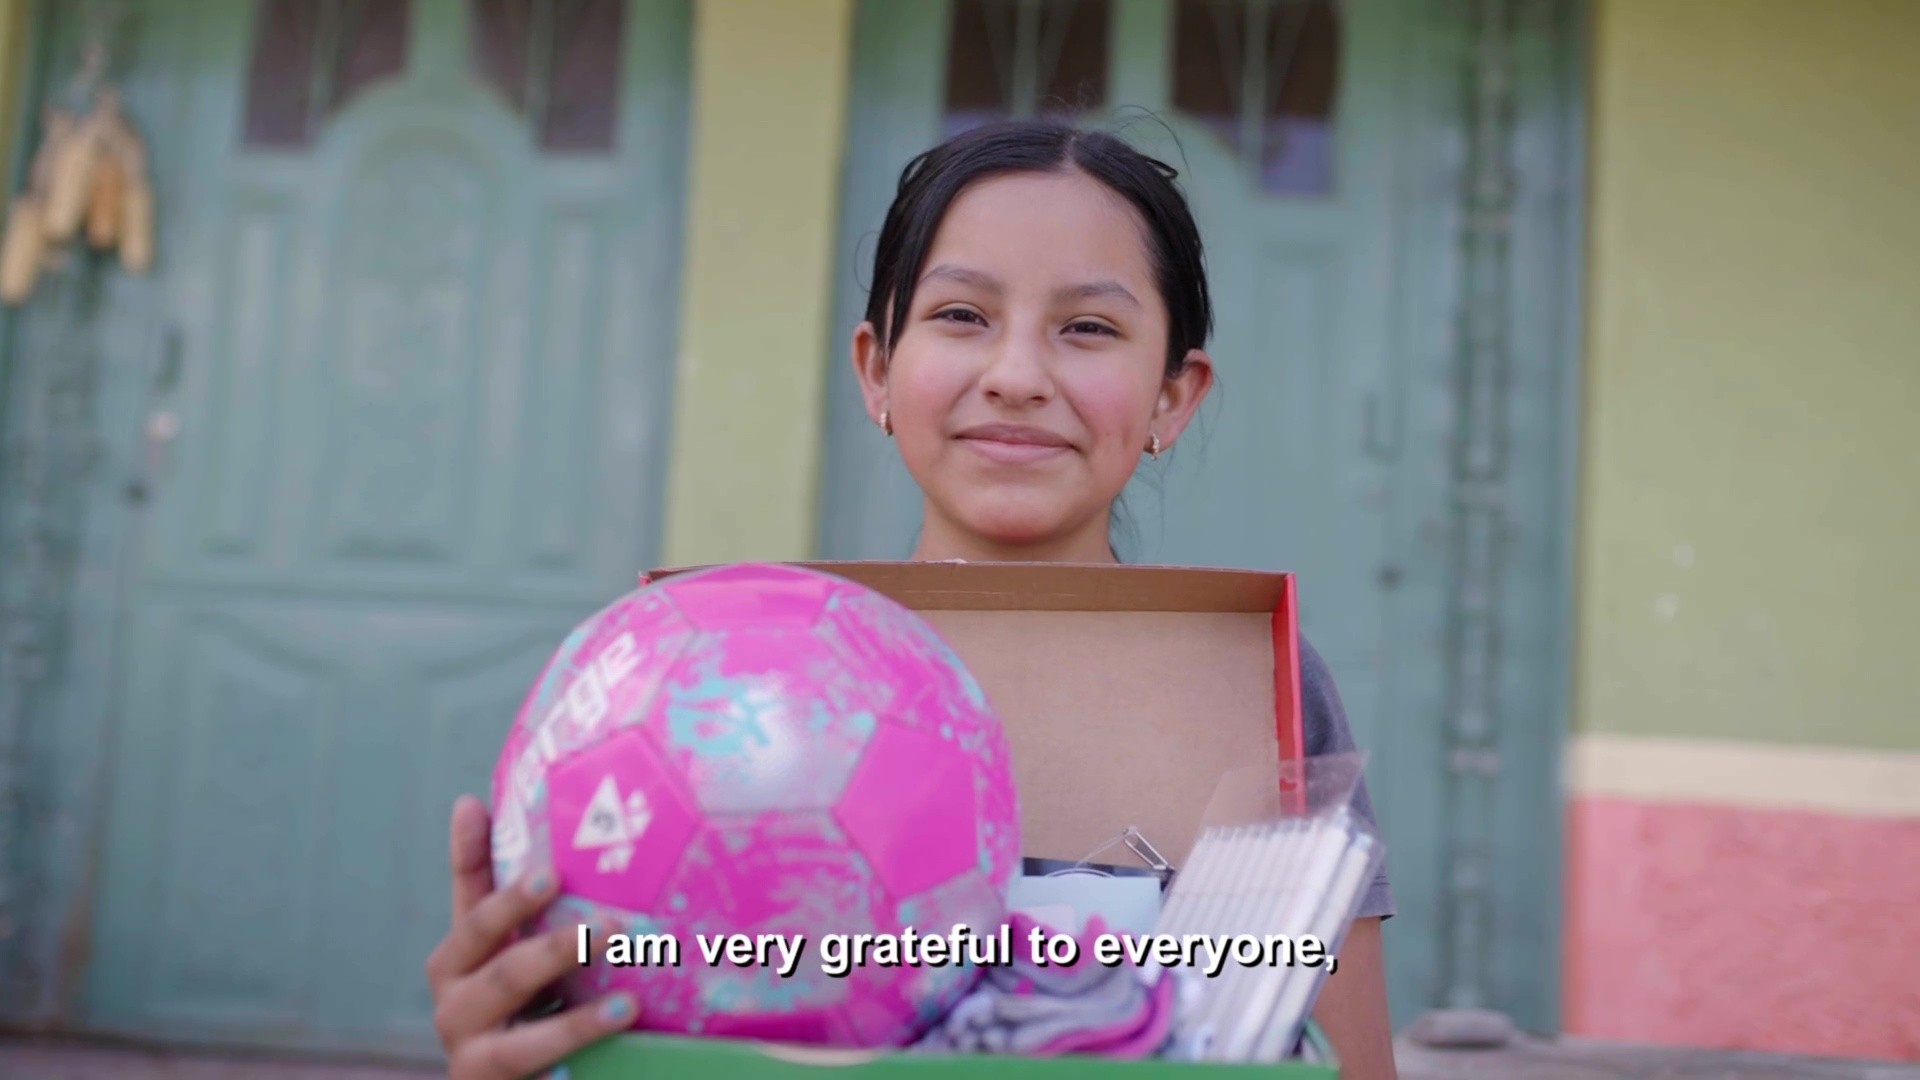 12 yr old girl in Ecuador, praises God for Operation Christmas Child shoebox gift received filled with colored markers and other surprises